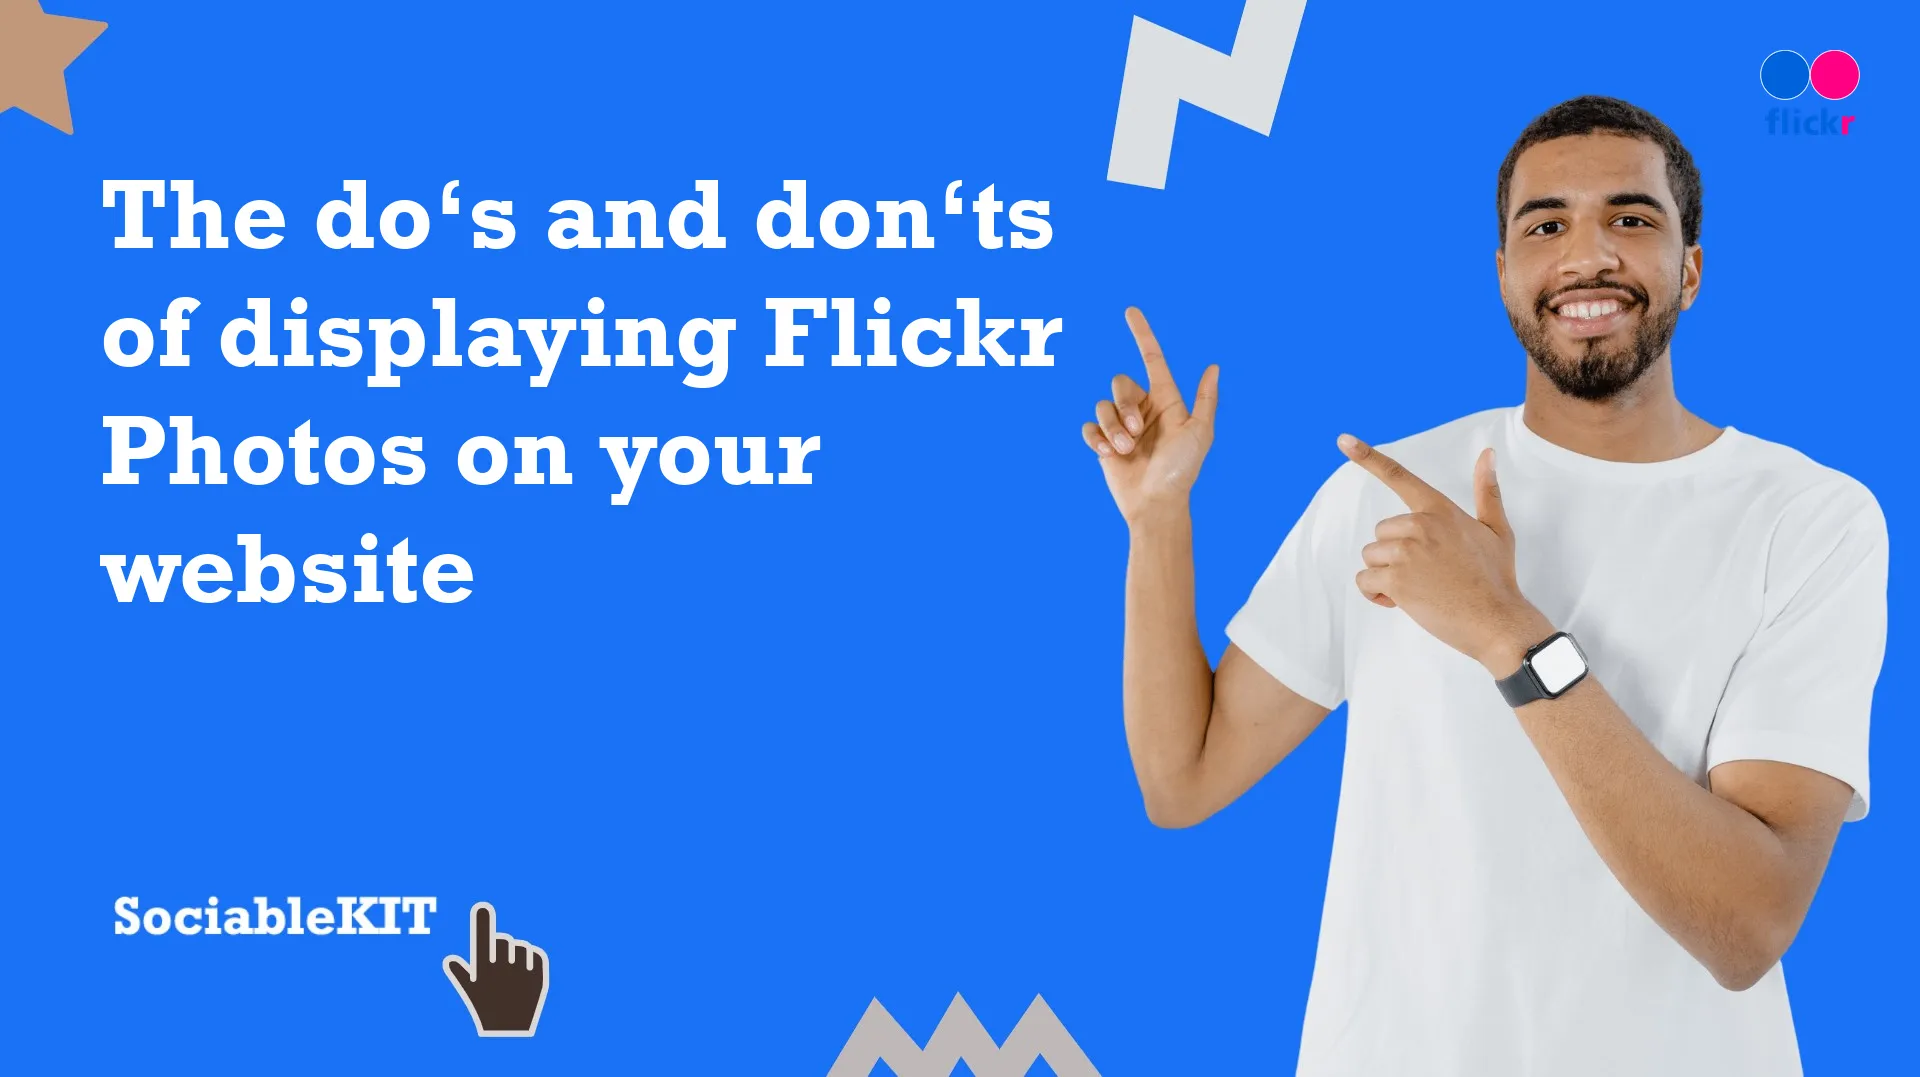 The do’s and don’ts of displaying Flickr Photos on your website